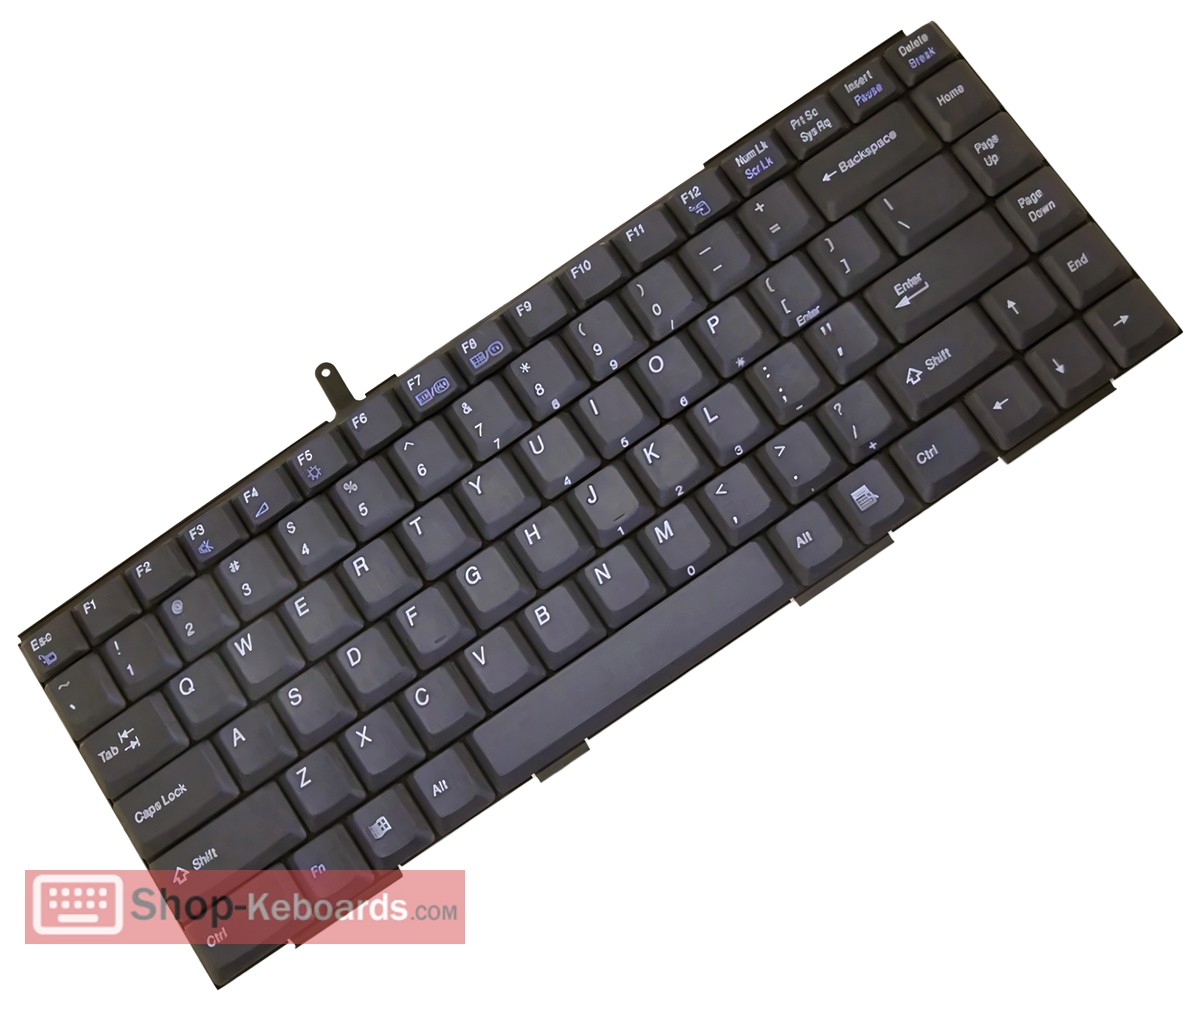 Sony VAIO PCG-FX410 Keyboard replacement